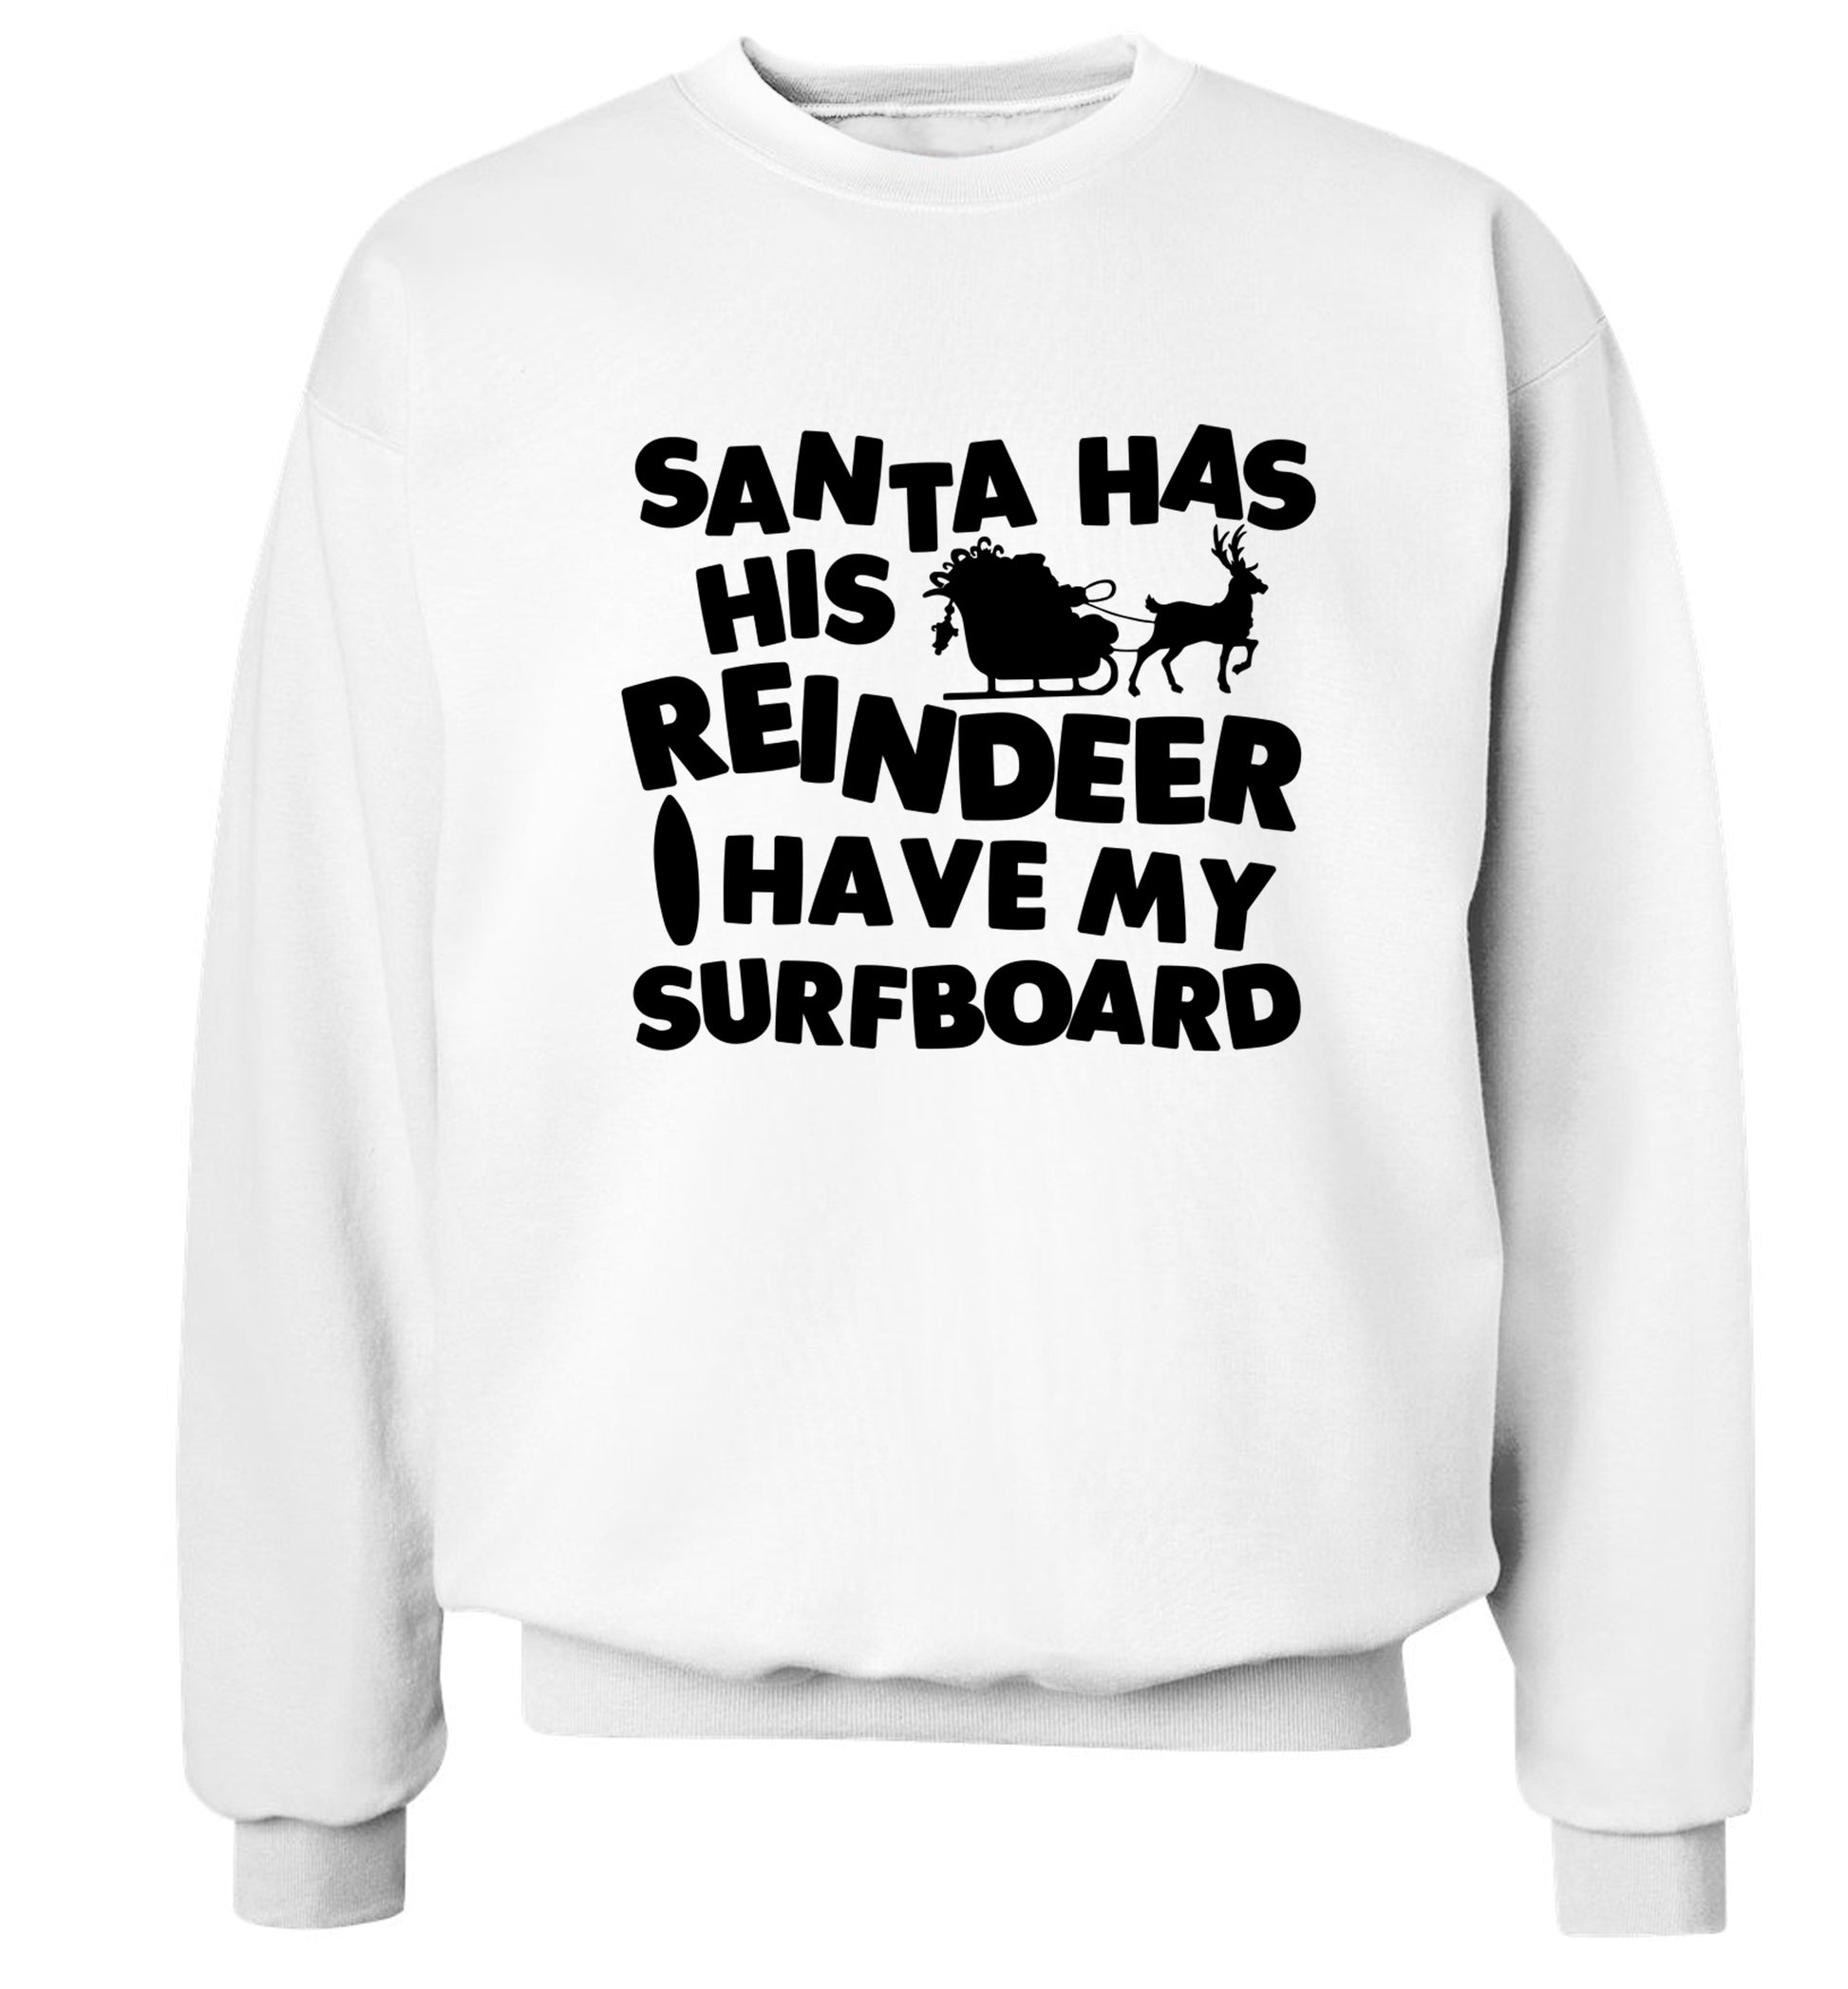 Santa has his reindeer I have my surfboard Adult's unisex white Sweater 2XL